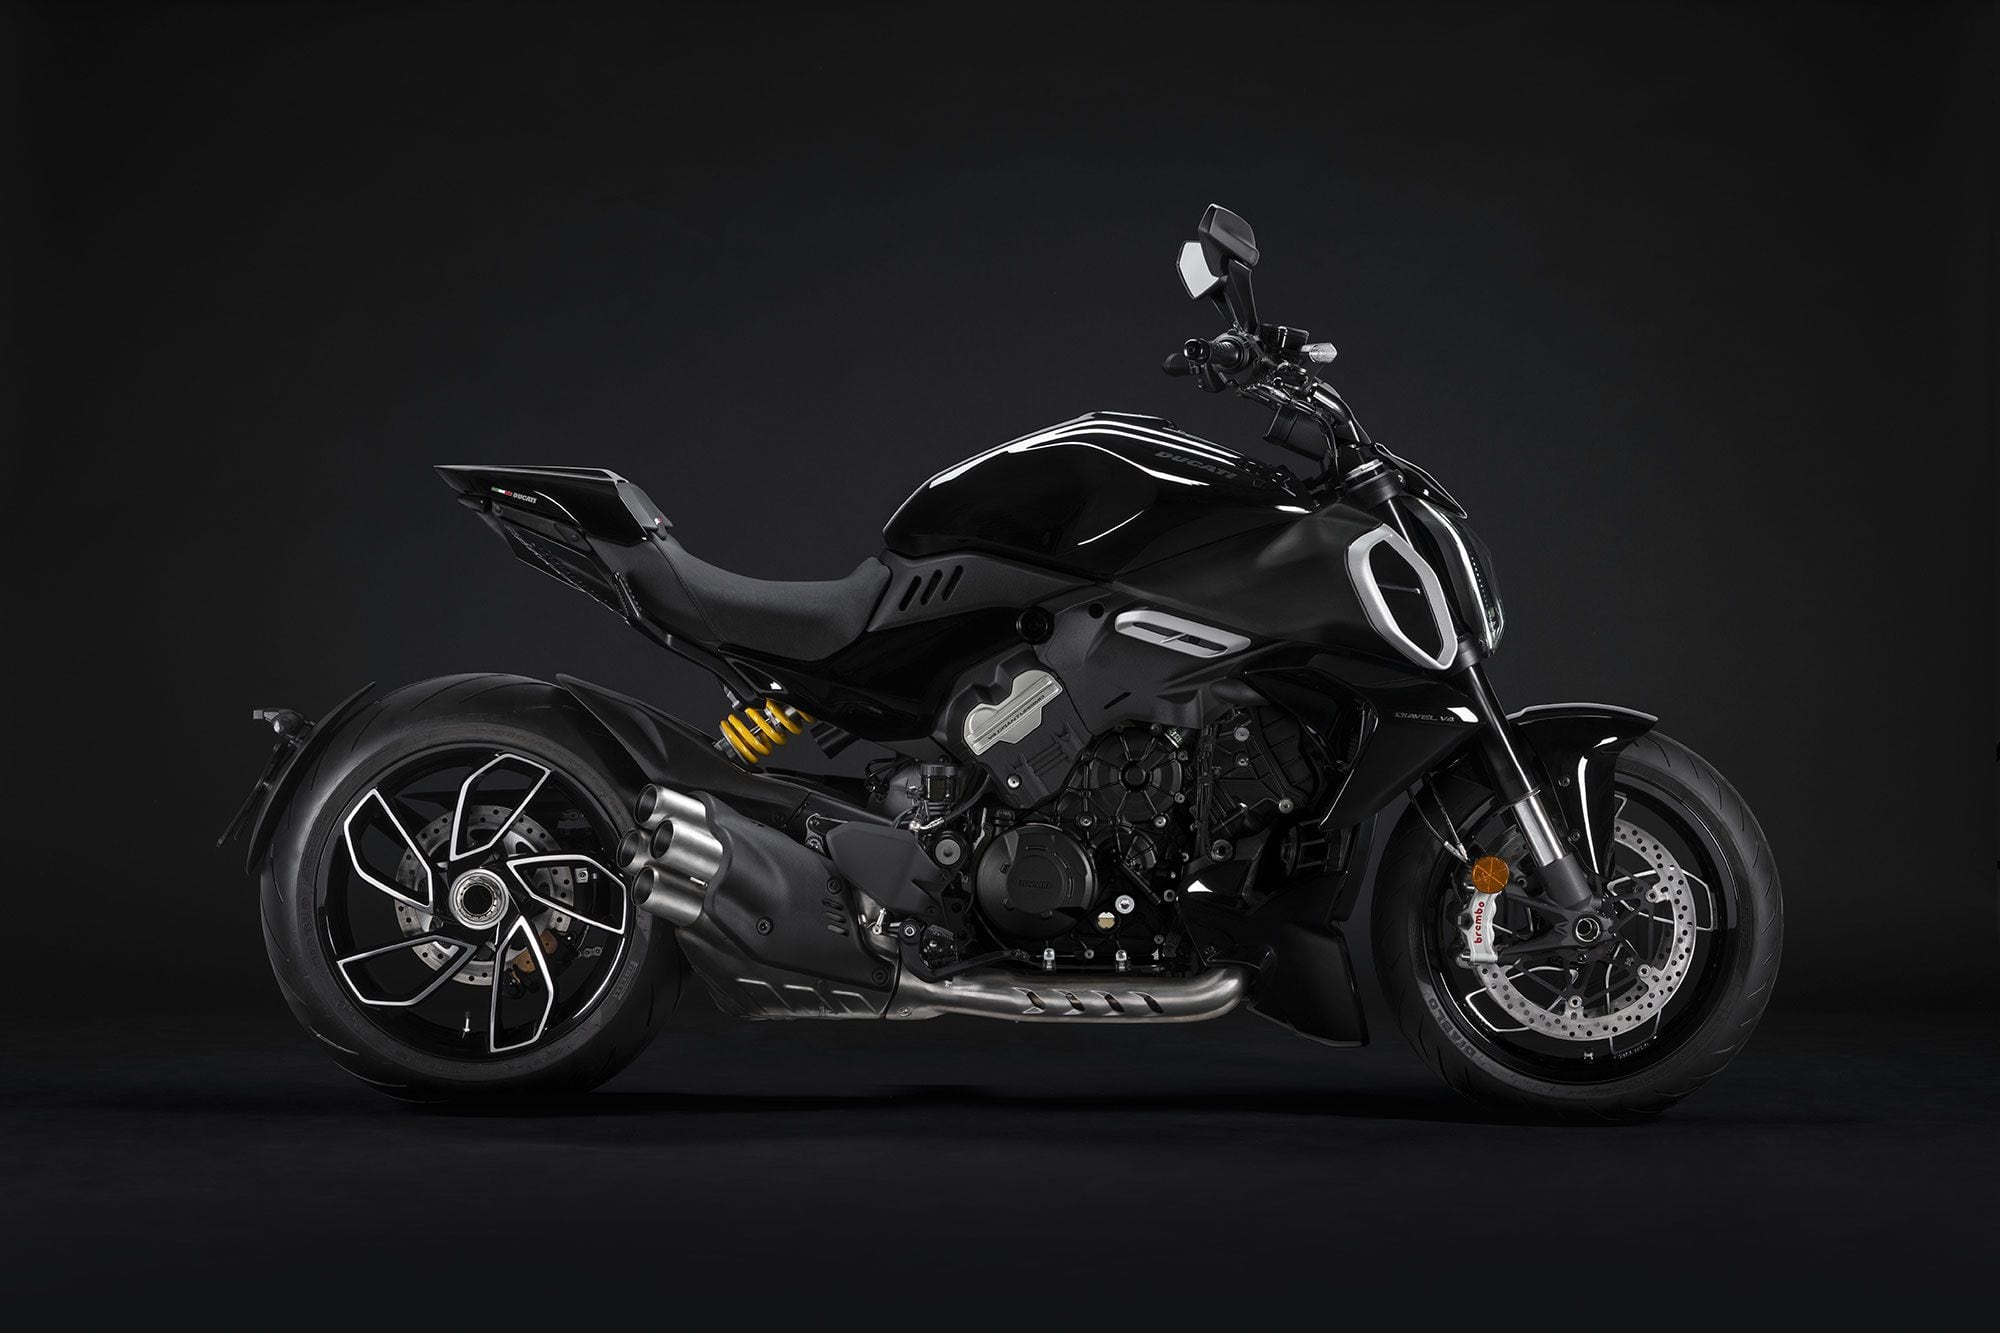 A four-exit exhaust is one of the key visual identifiers of the Diavel V4.